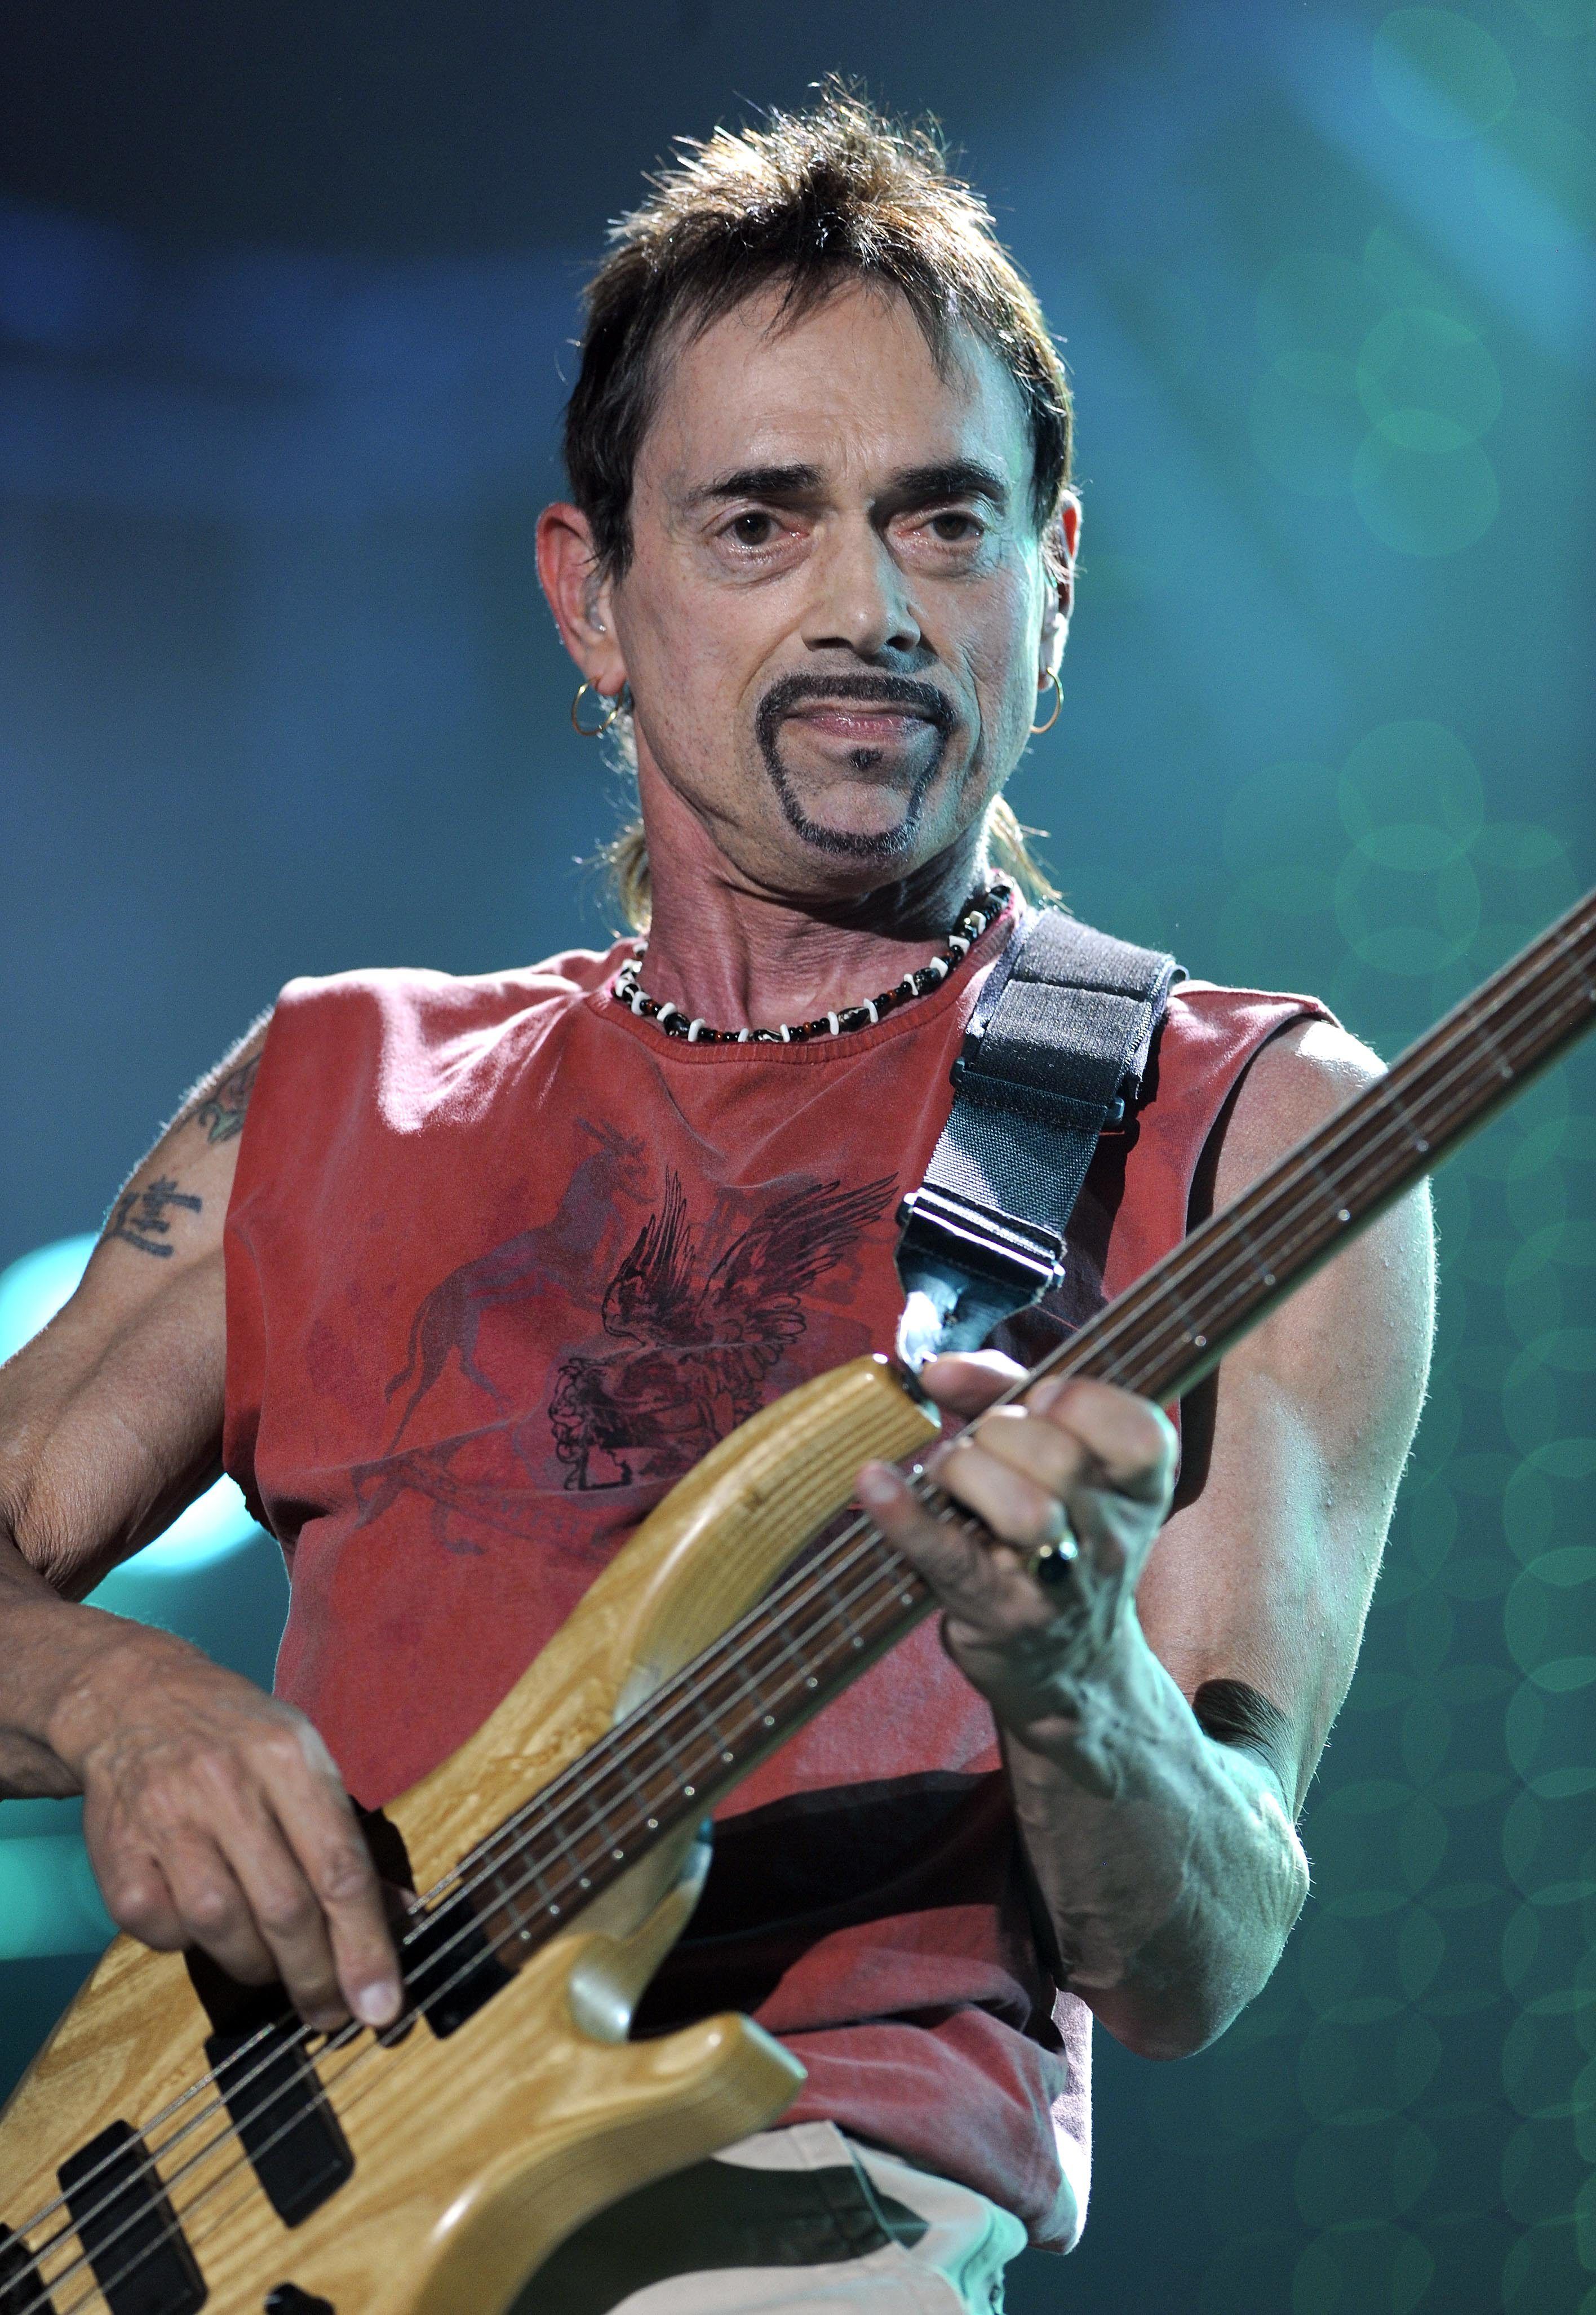 INTERVIEW WITH ANDY FRASER, FORMERLY OF FREE | MetalTalk